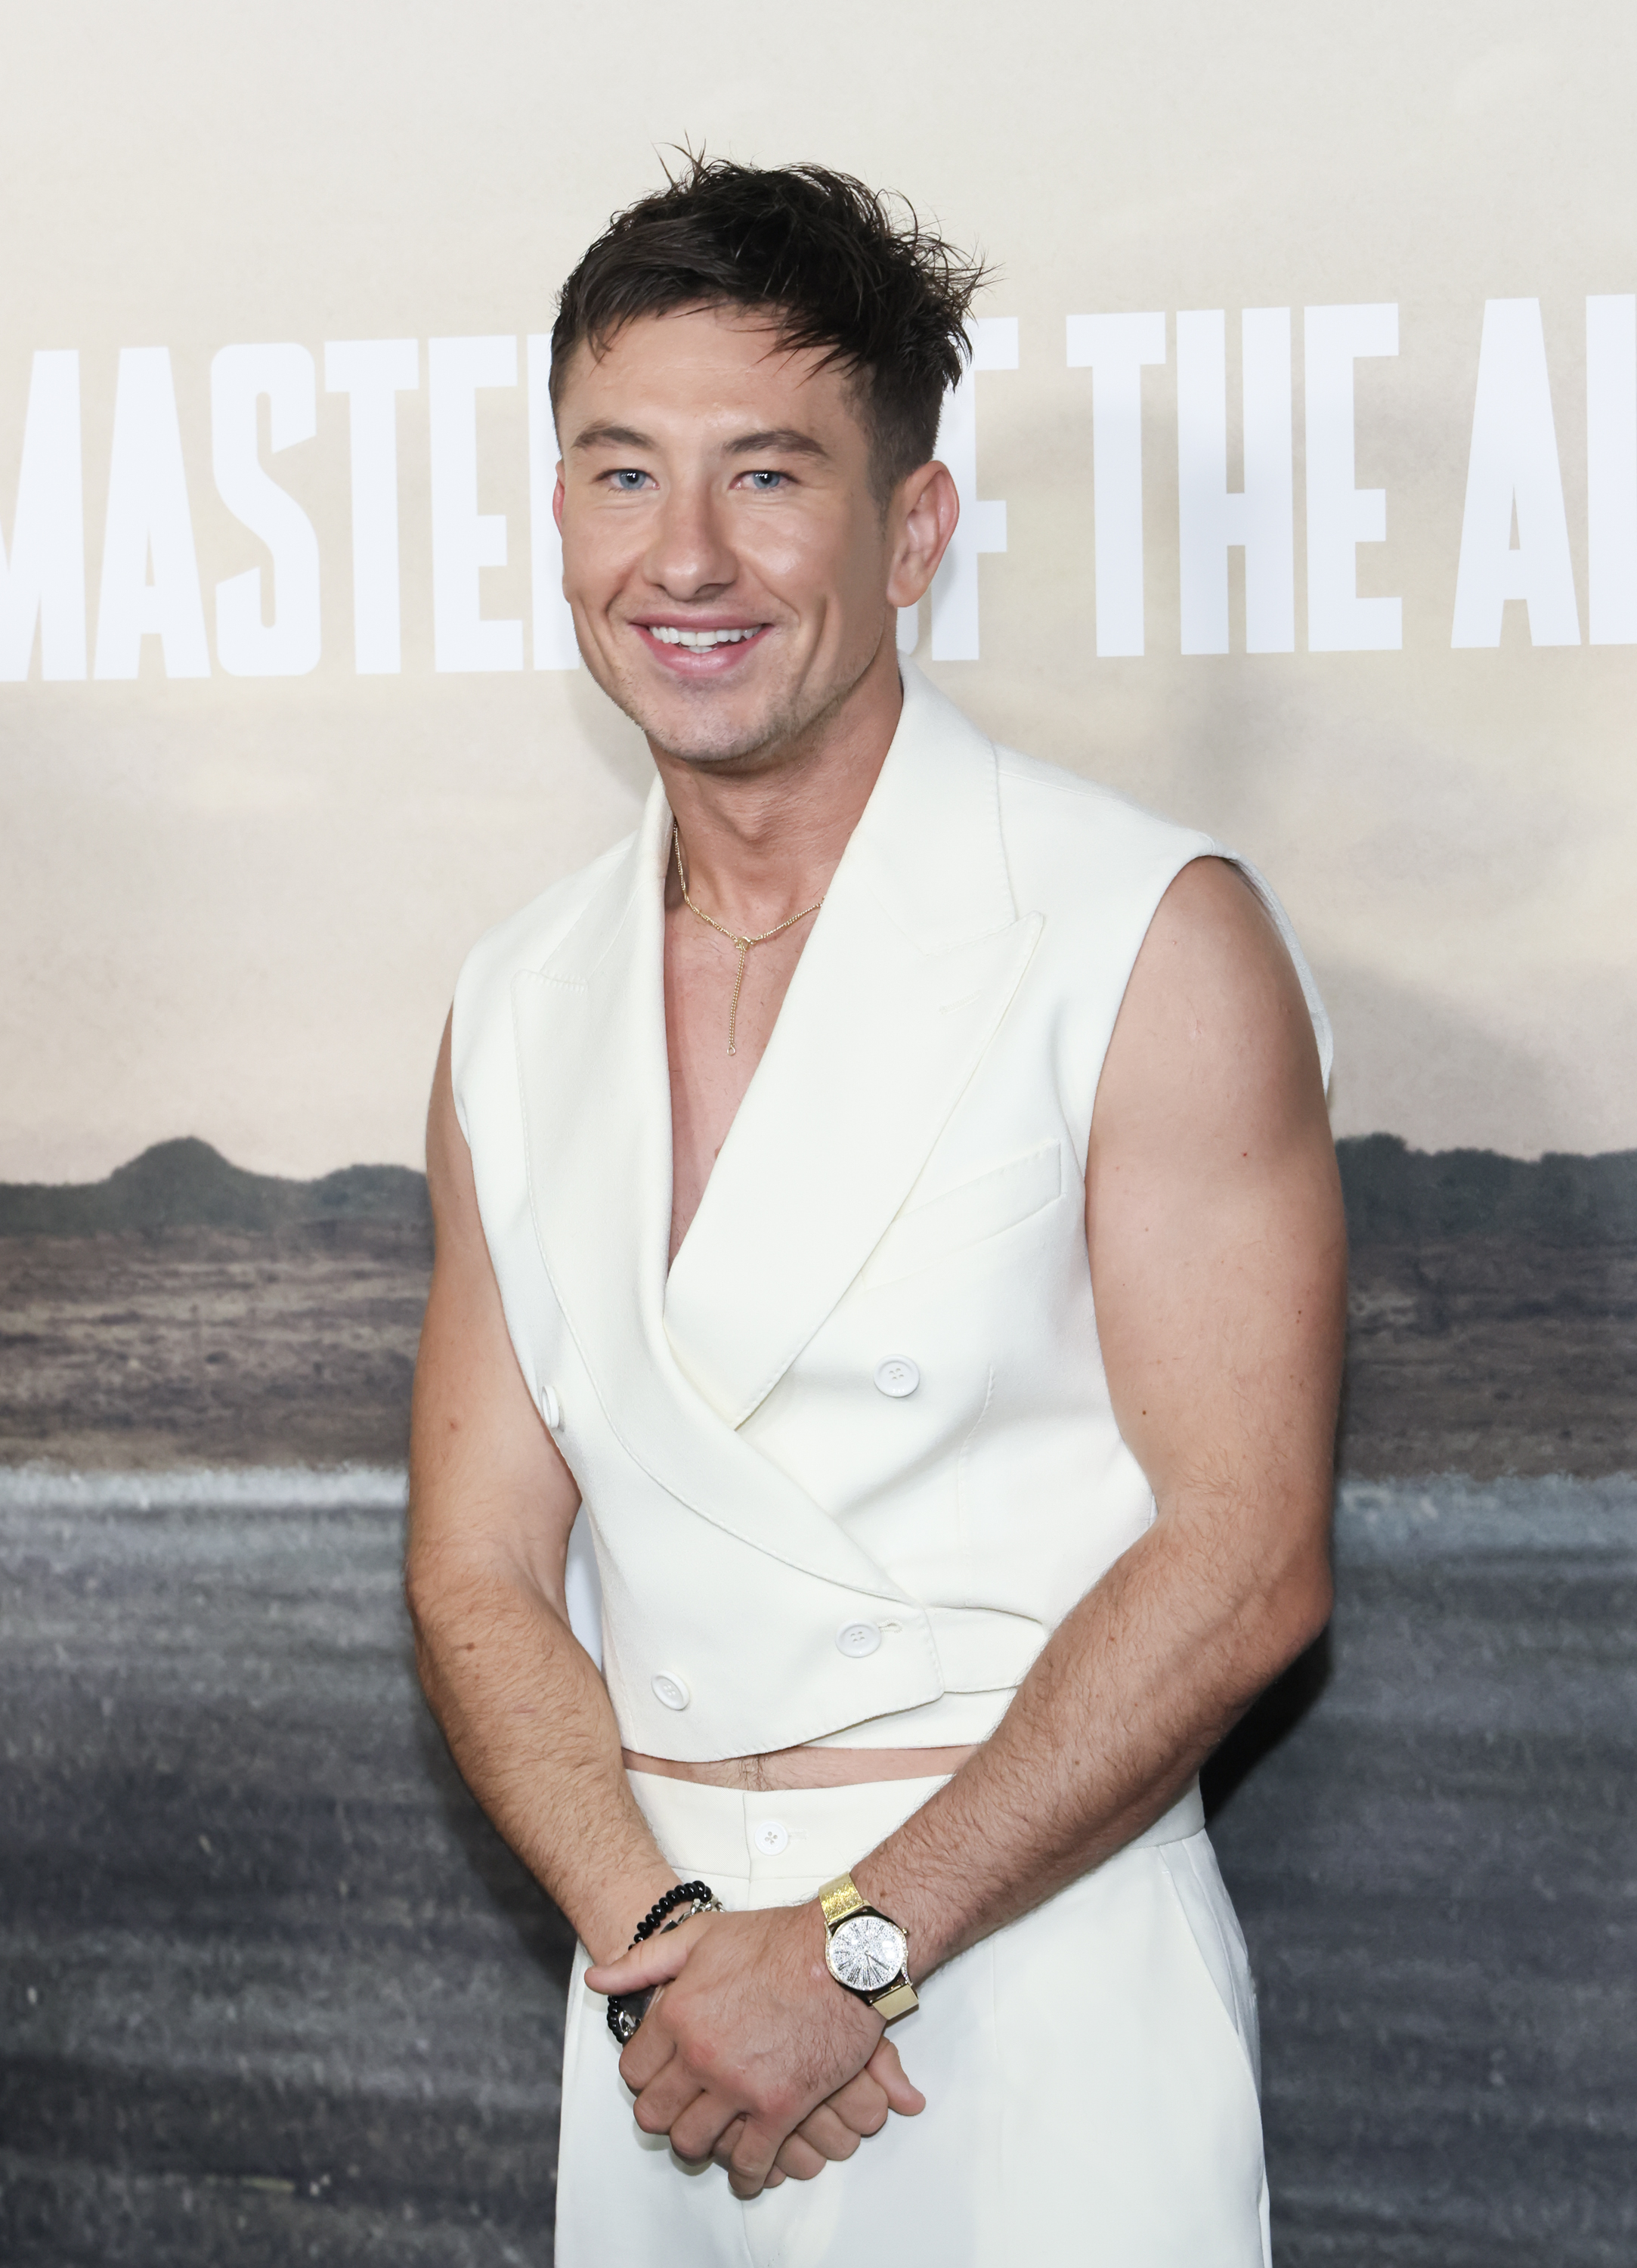 Barry Keoghan in a sleeveless jacket and trousers, posing with hands clasped at a premiere